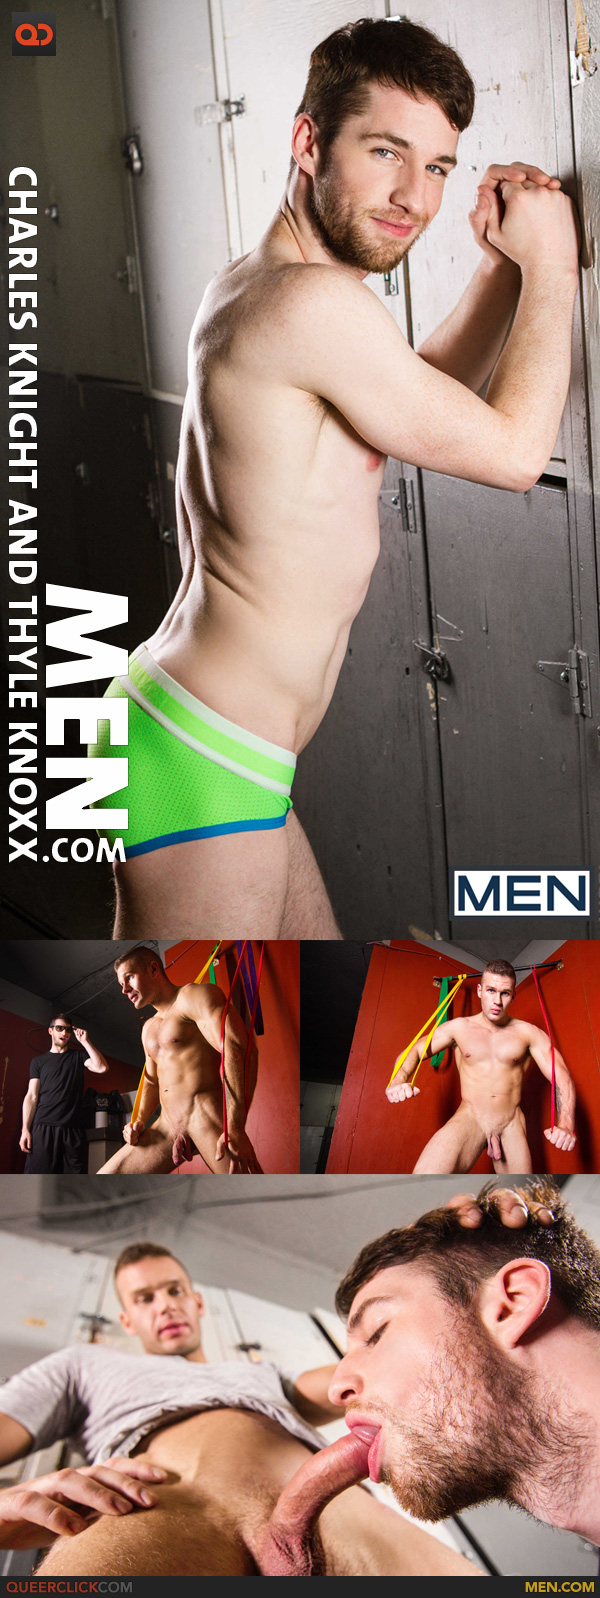 Men.com:  Charles Knight and Thyle Knoxx